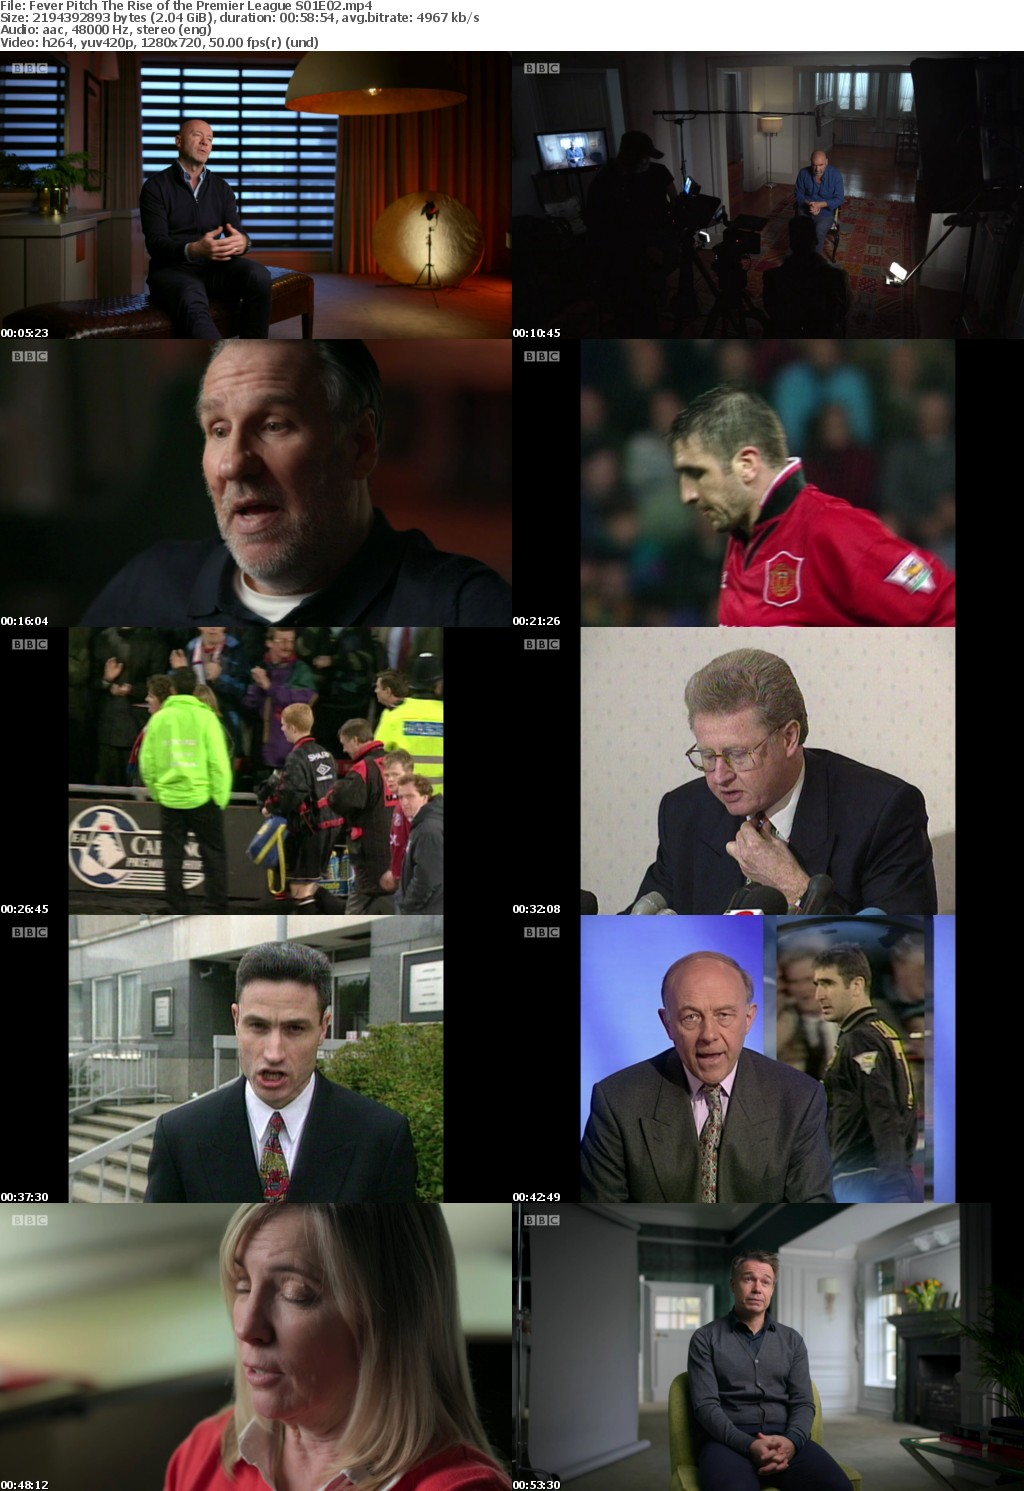 Fever Pitch - The Rise of the Premier League S01E02 (1280x720p HD, 50fps, soft Eng subs)